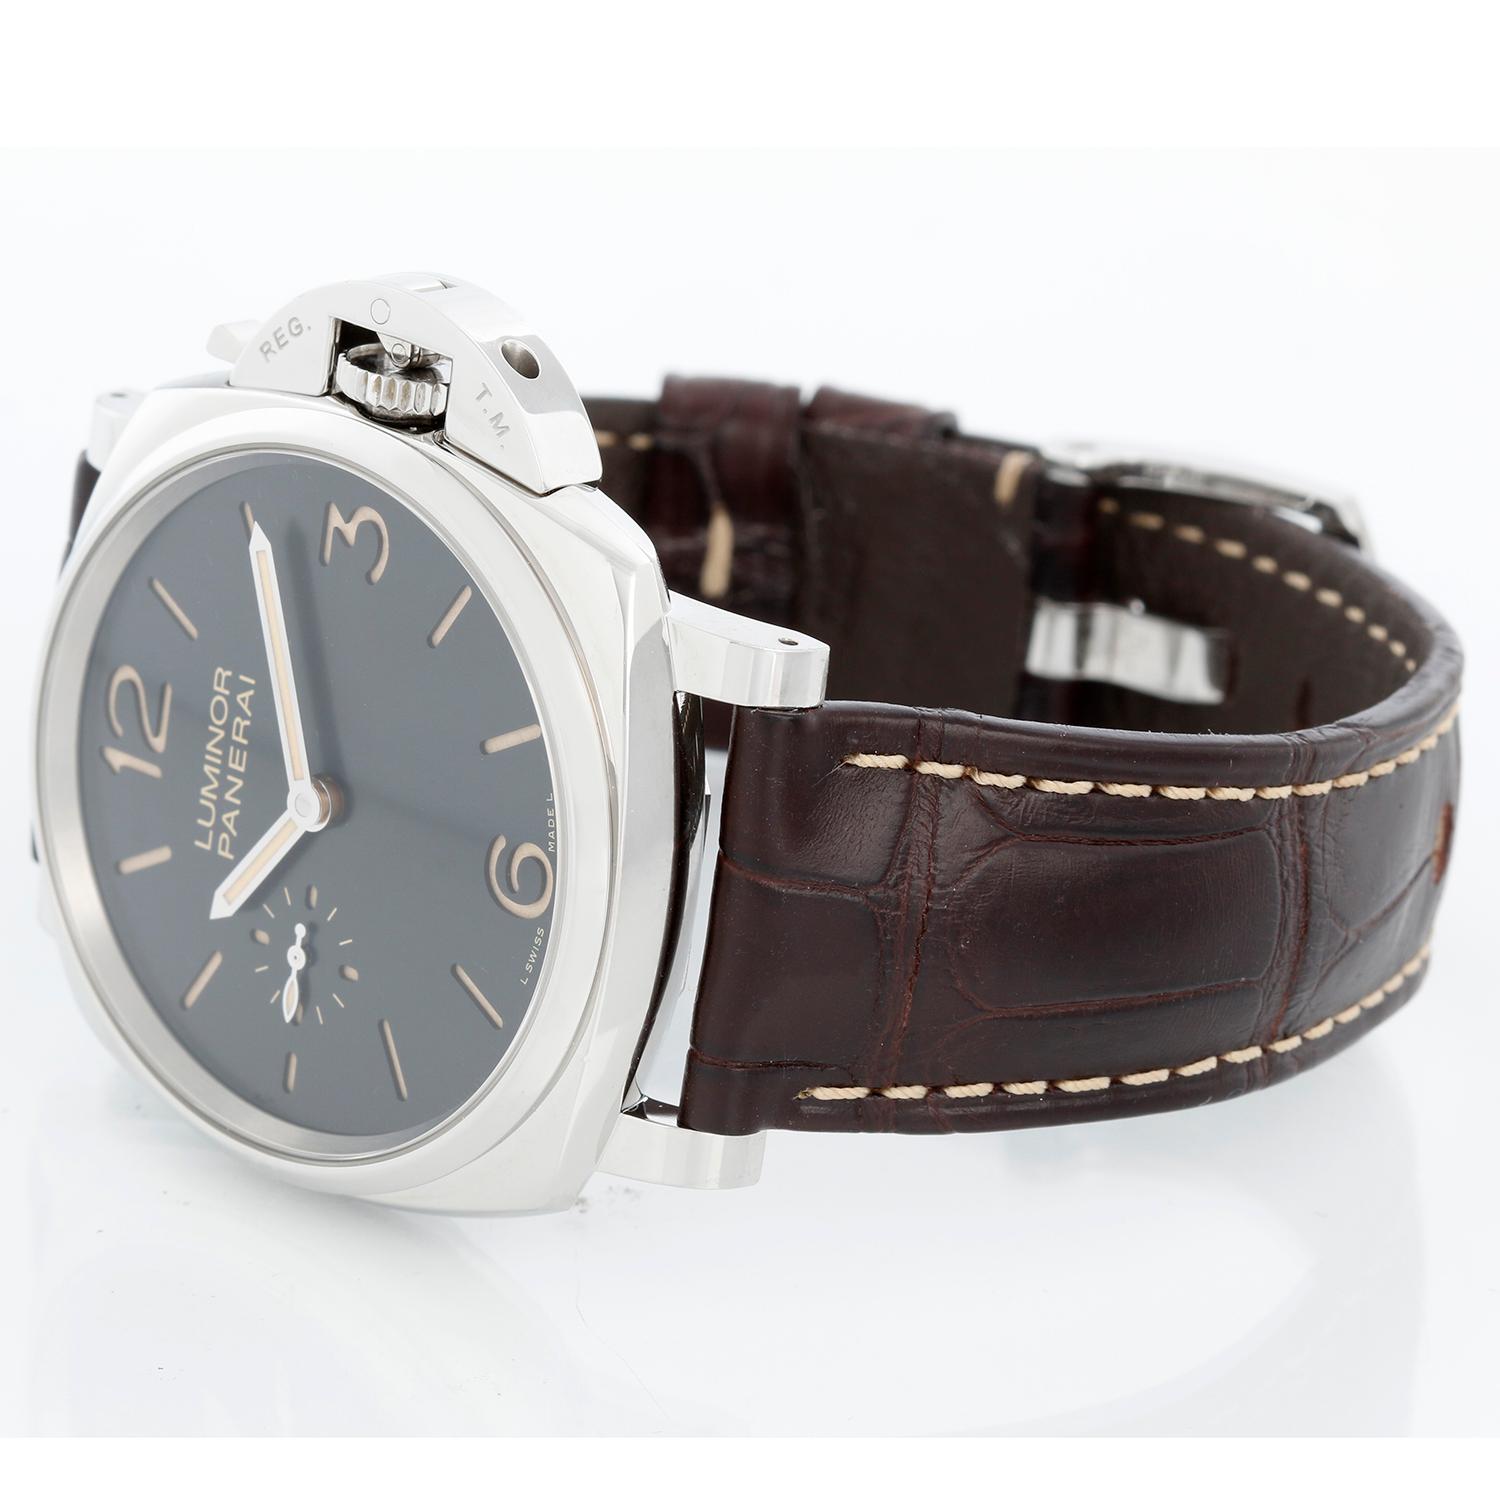 Panerai Luminor Due 3-Day 42mm Men's Watch - Manual winding 3-Day Power Reserve. Stainless Steel case ( 42 mm). Black dial. Brown Panerai strap band with white stitching. Pre-owned with Panerai Box 